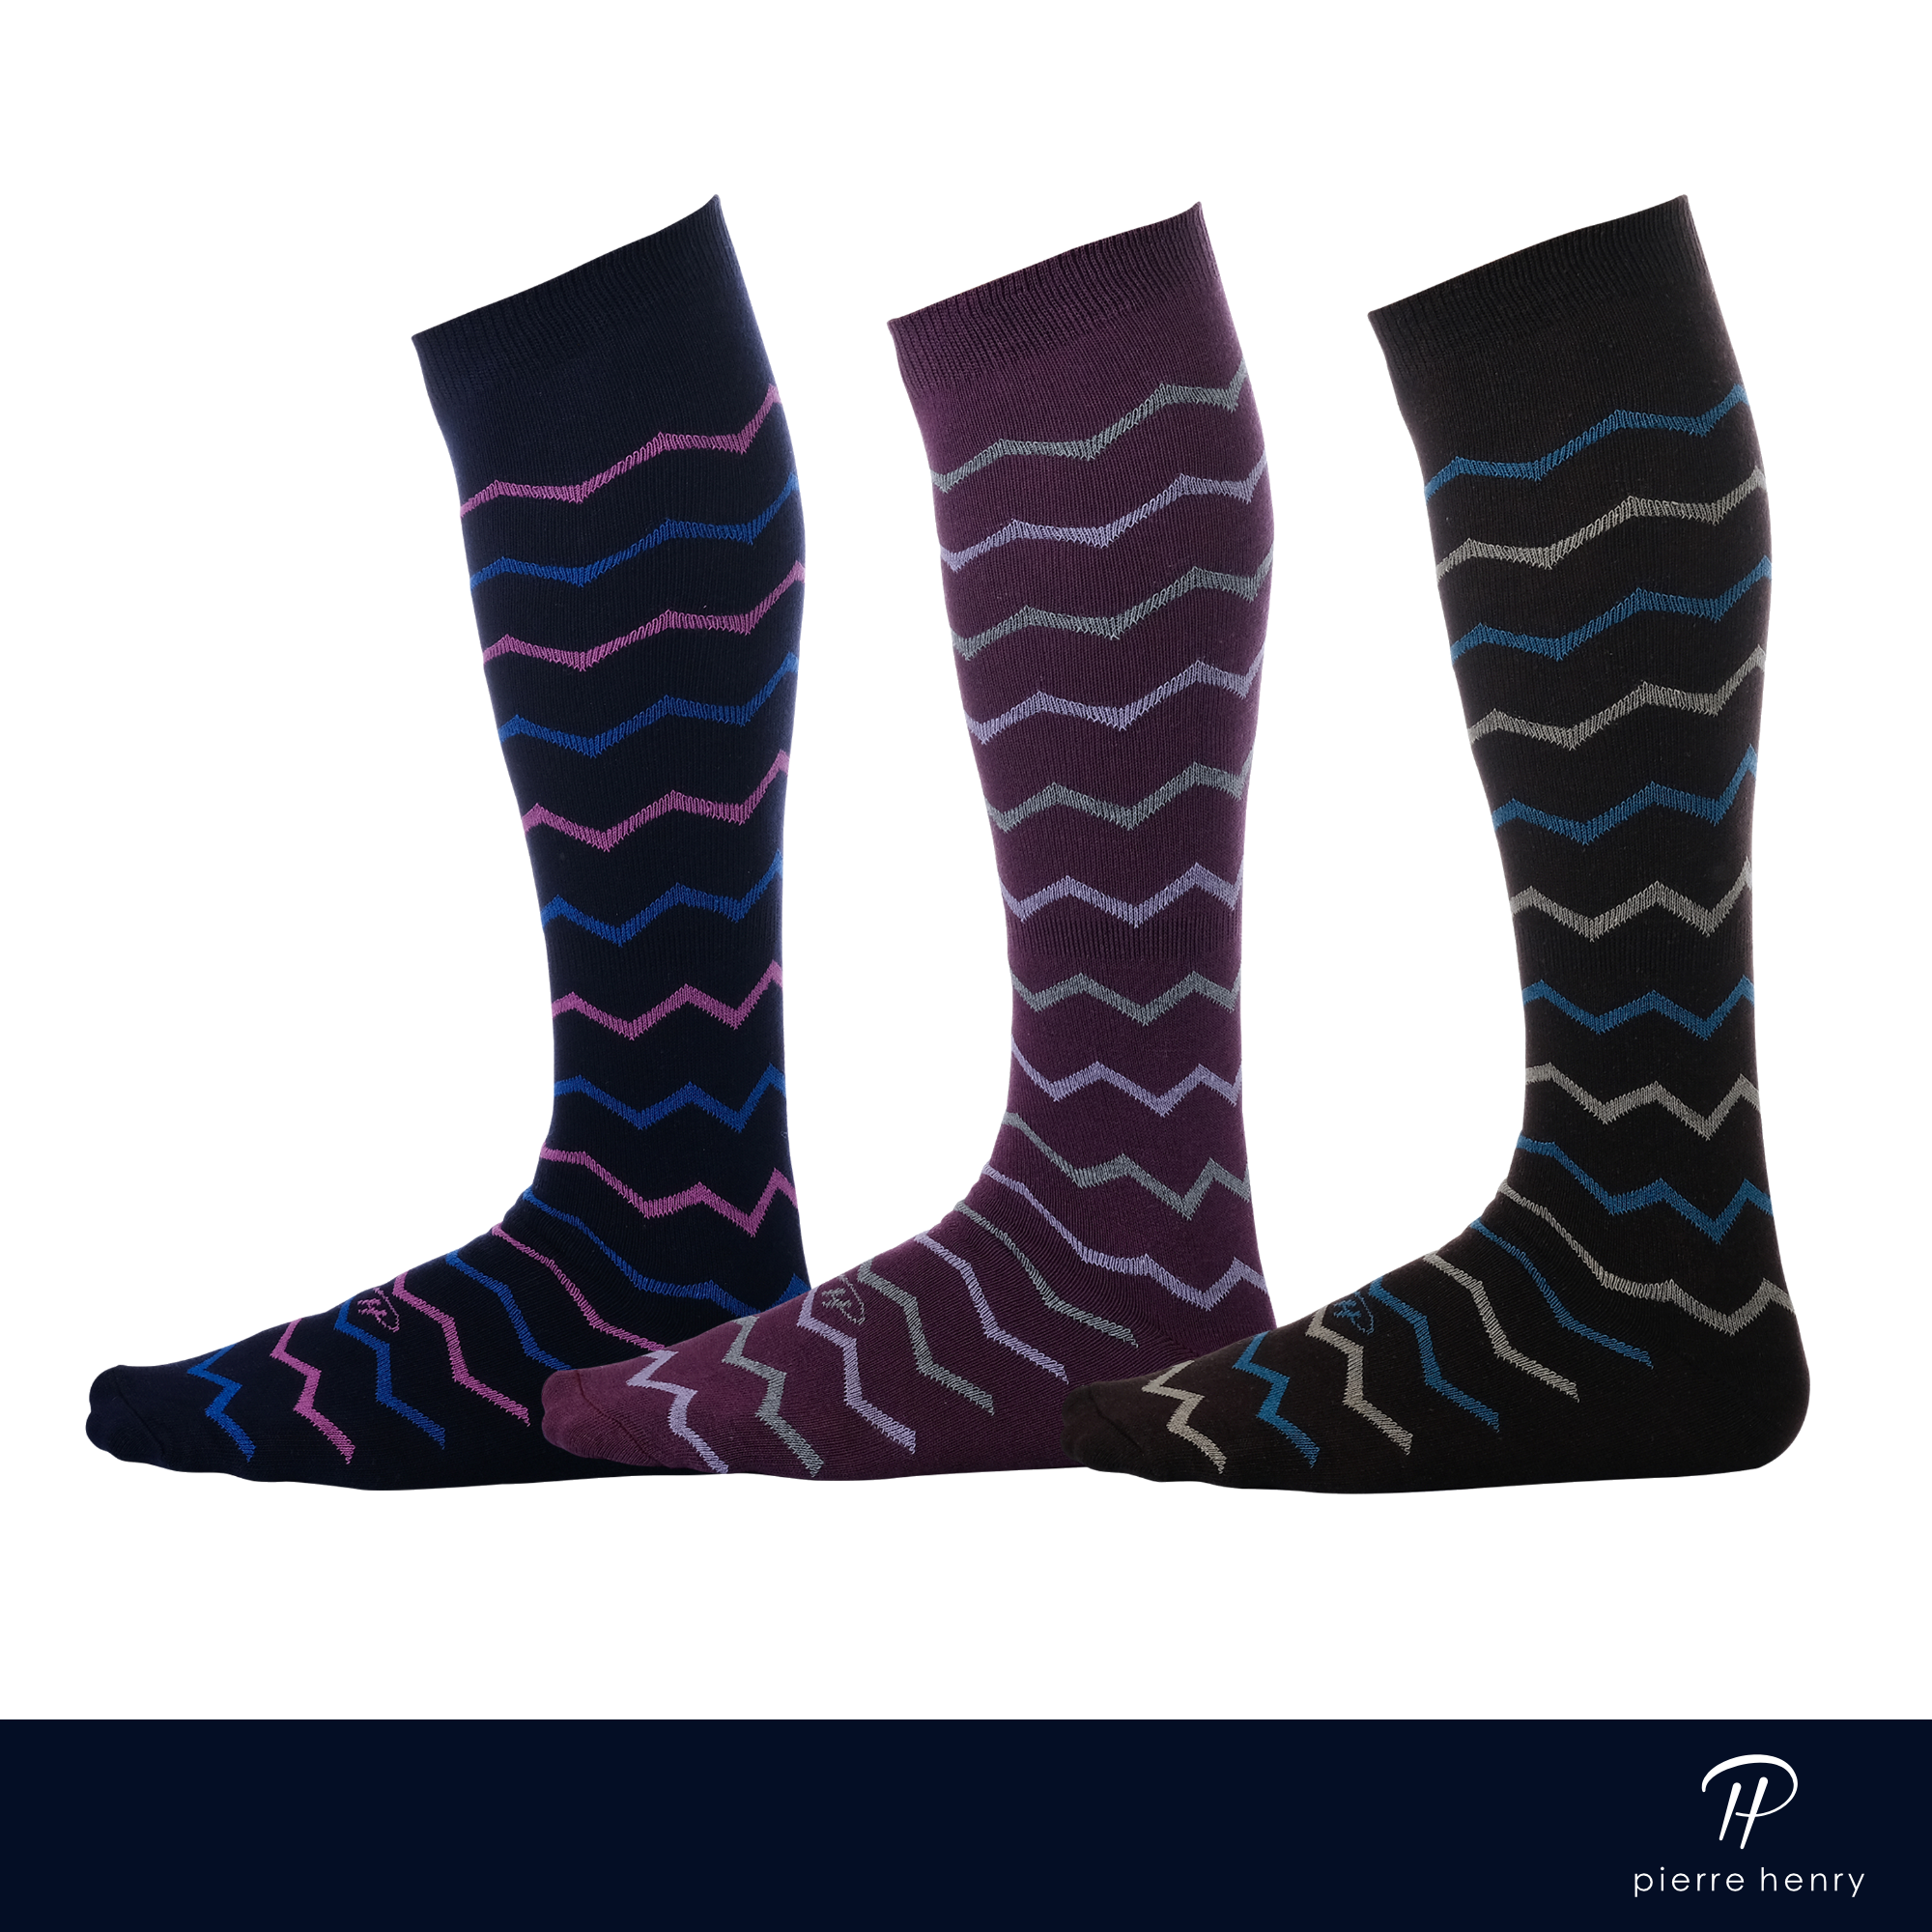 black dress socks with blue and pink zigzags, burgundy dress socks with grey zigzags, brown dress socks with blue and beige zigzags